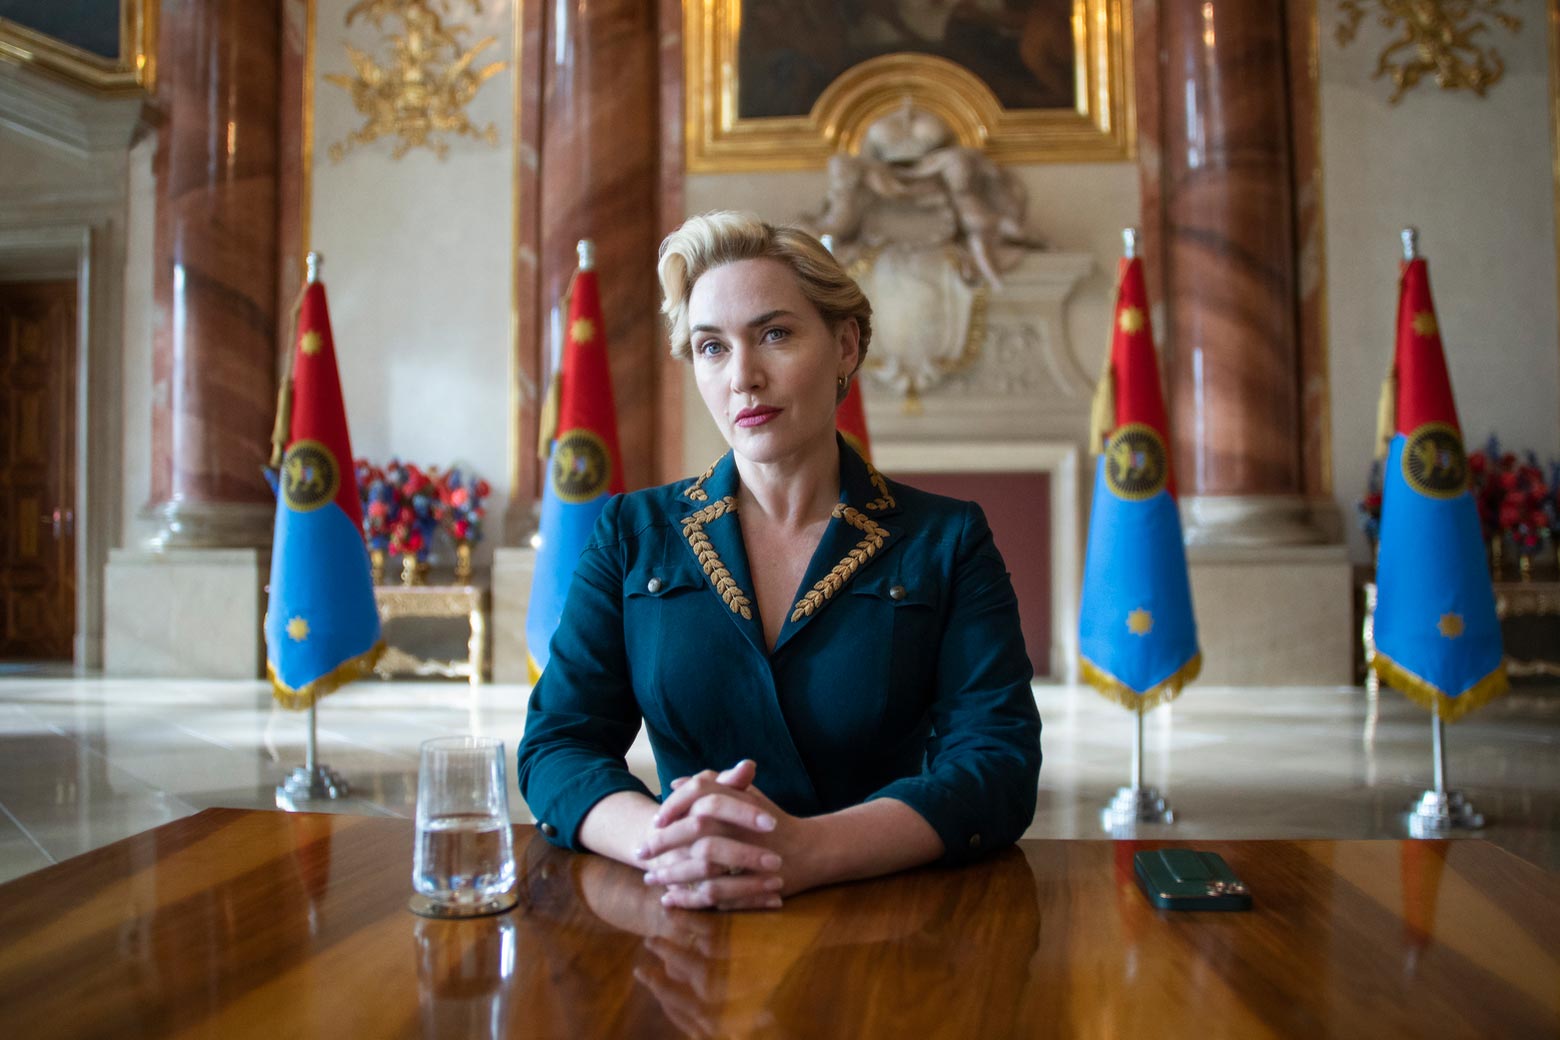 Kate Winslet as Chancellor Elena, wearing a blue power suit and sitting at a table with flags in the background.